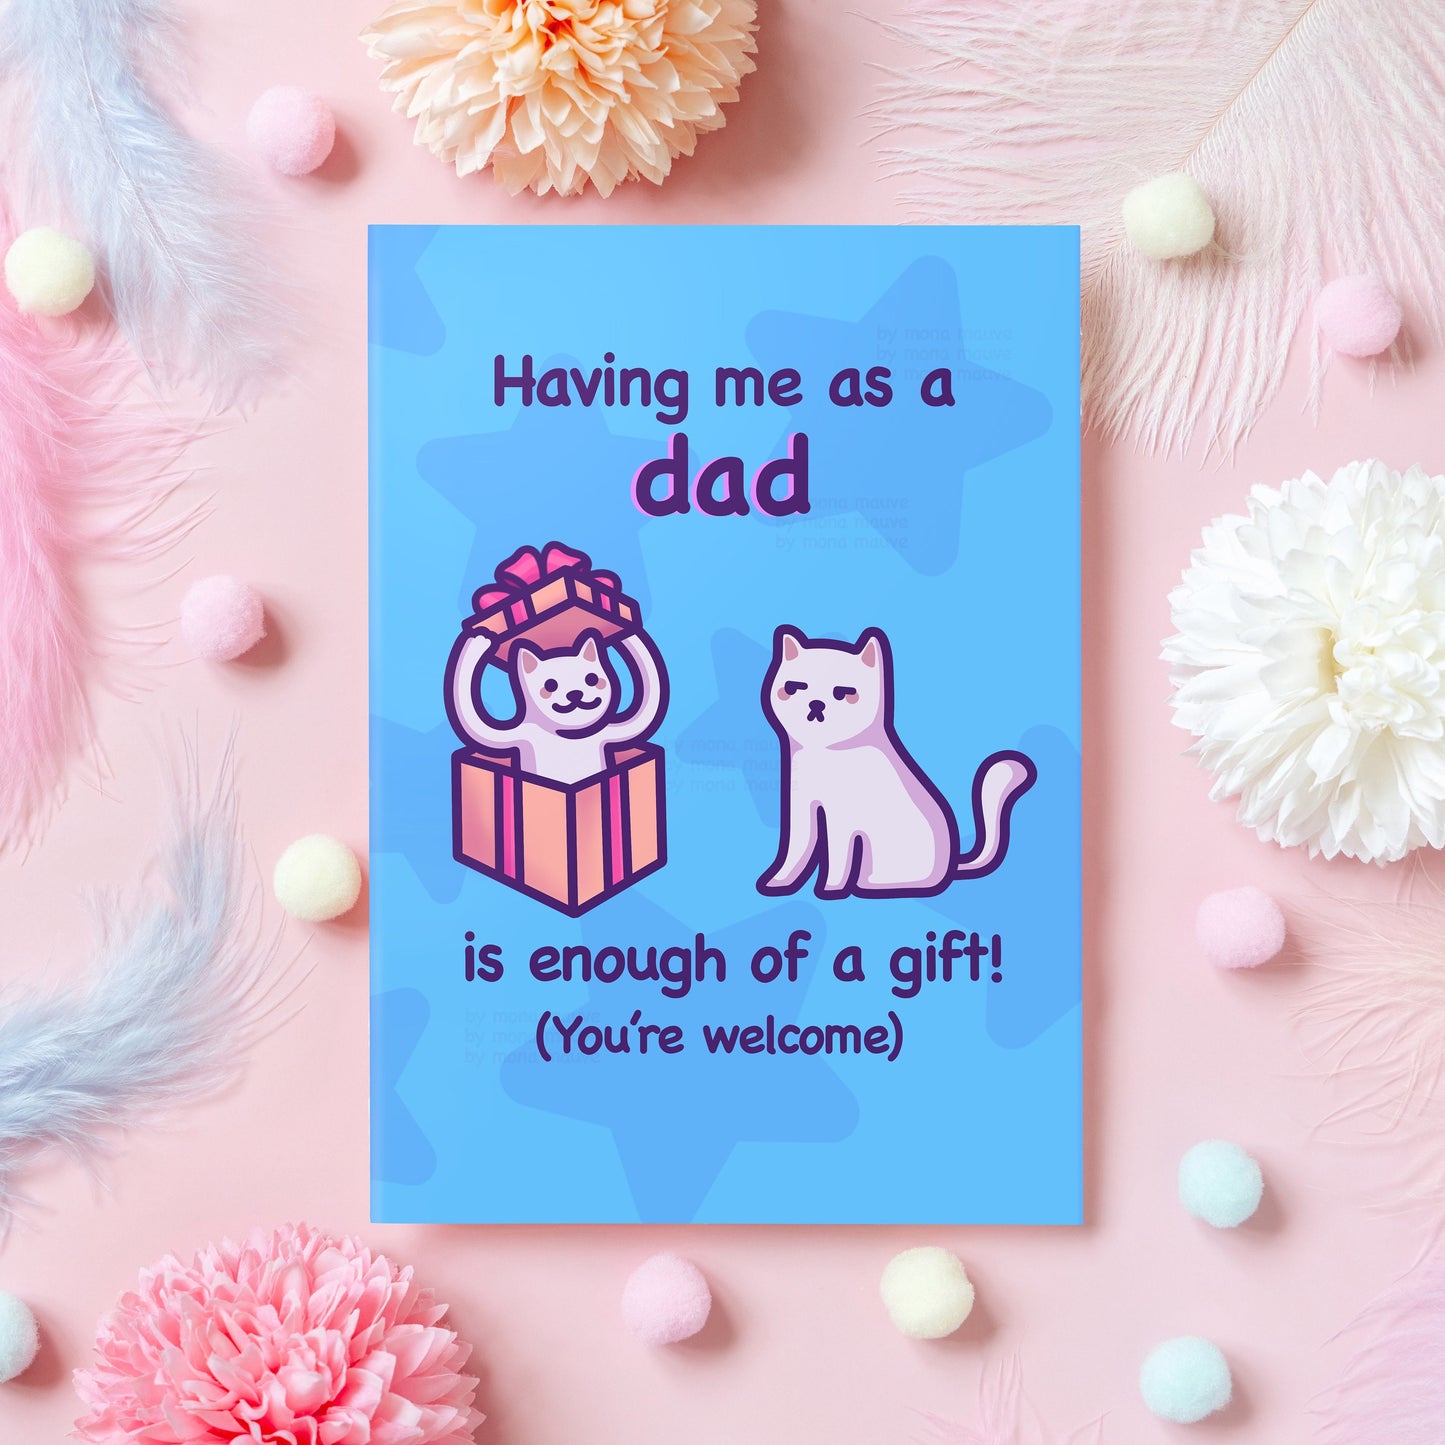 Funny Child Birthday Card | Having Me as a Dad Is Enough of a Gift! | Cute Cat Card for Birthday | Gift from Dad to Son/Daughter/Child